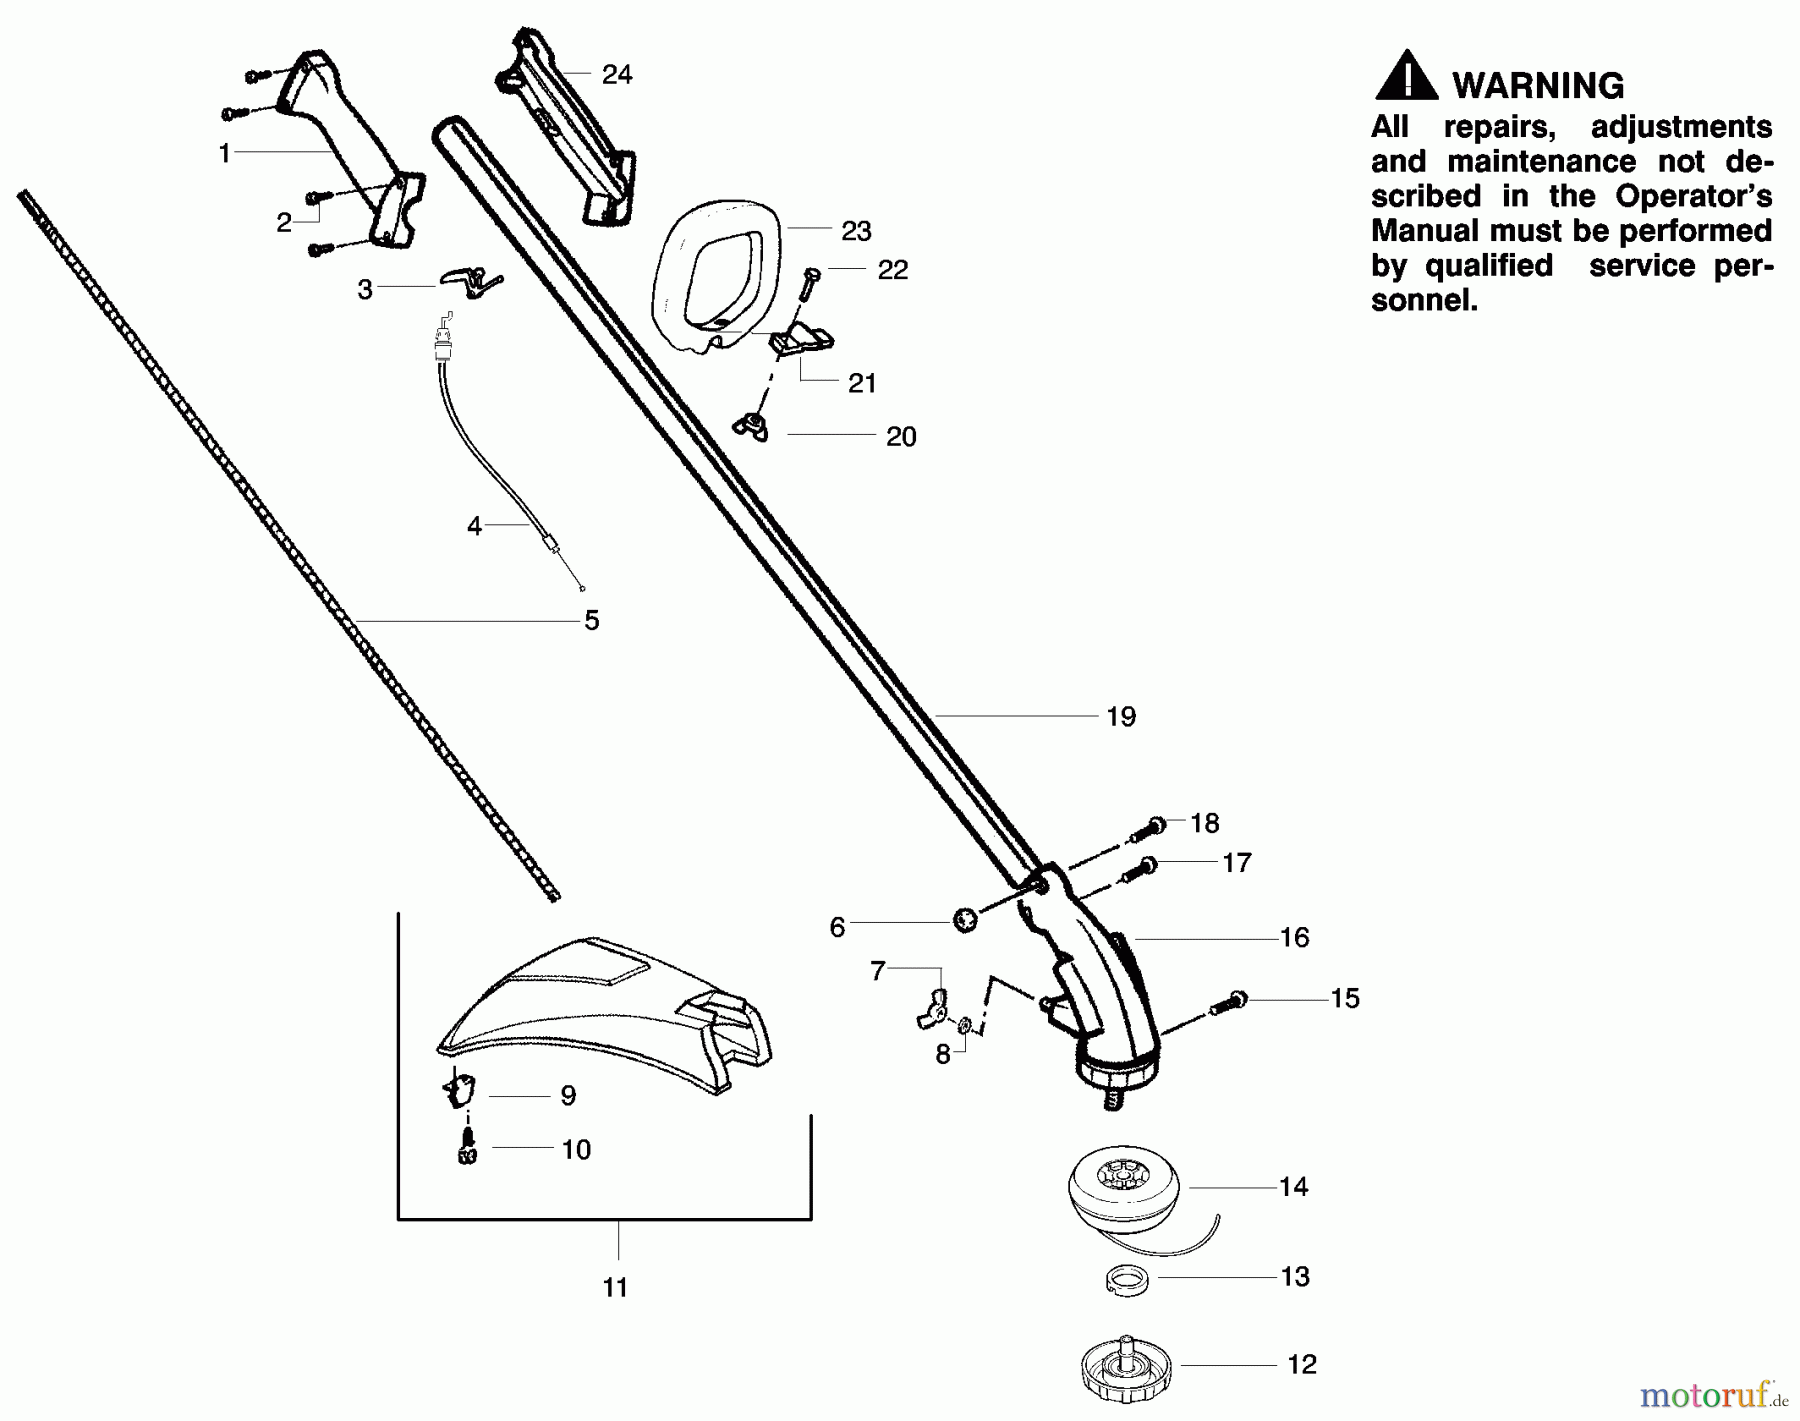  Poulan / Weed Eater Motorsensen, Trimmer PL25 (Type 1) - Poulan String Trimmer Handle, Chassis & Bar Assembly